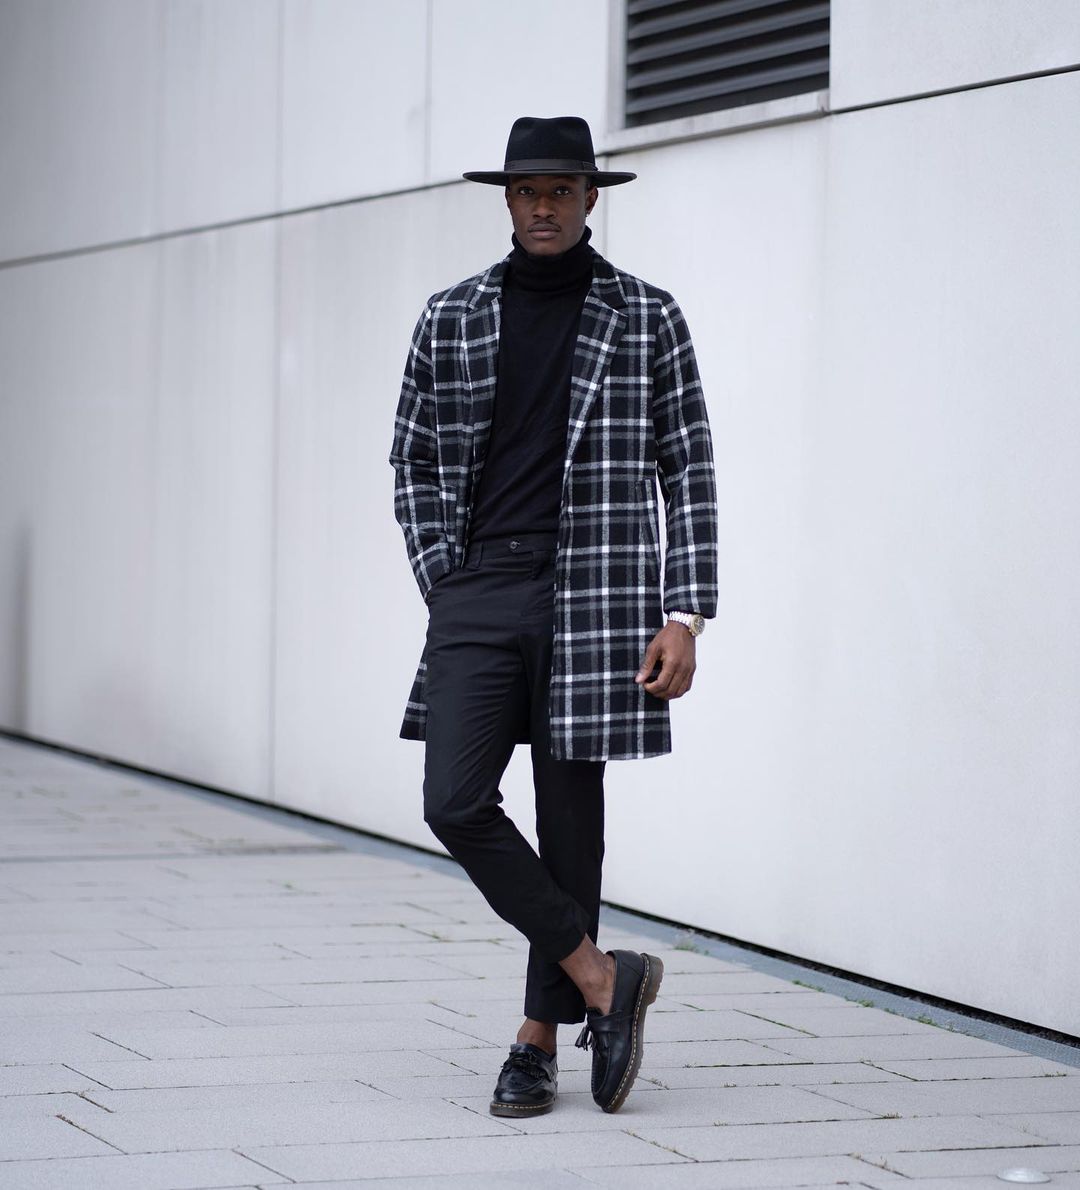 How To Layering Clothes: 5 Layering Tips For The Stylish Man | Style Rave